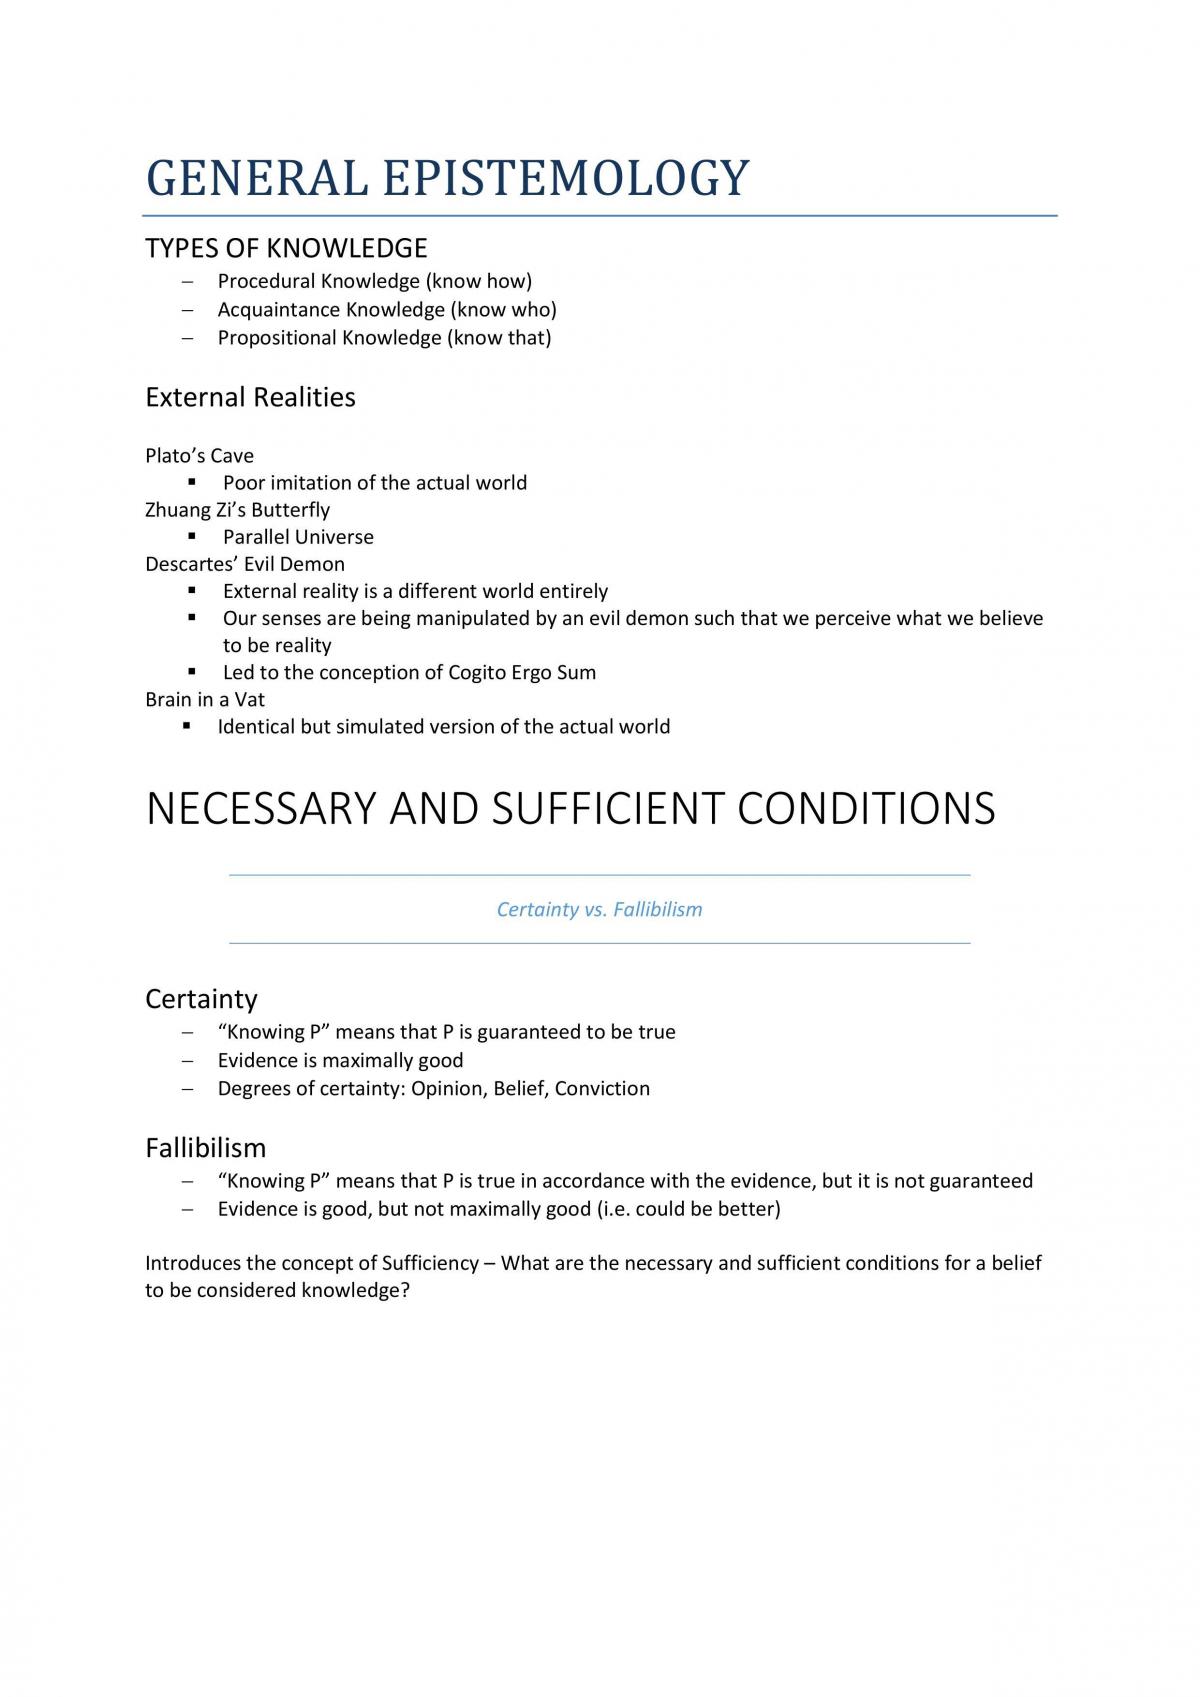 H2 Knowledge and Inquiry Complete Study Notes - Page 2